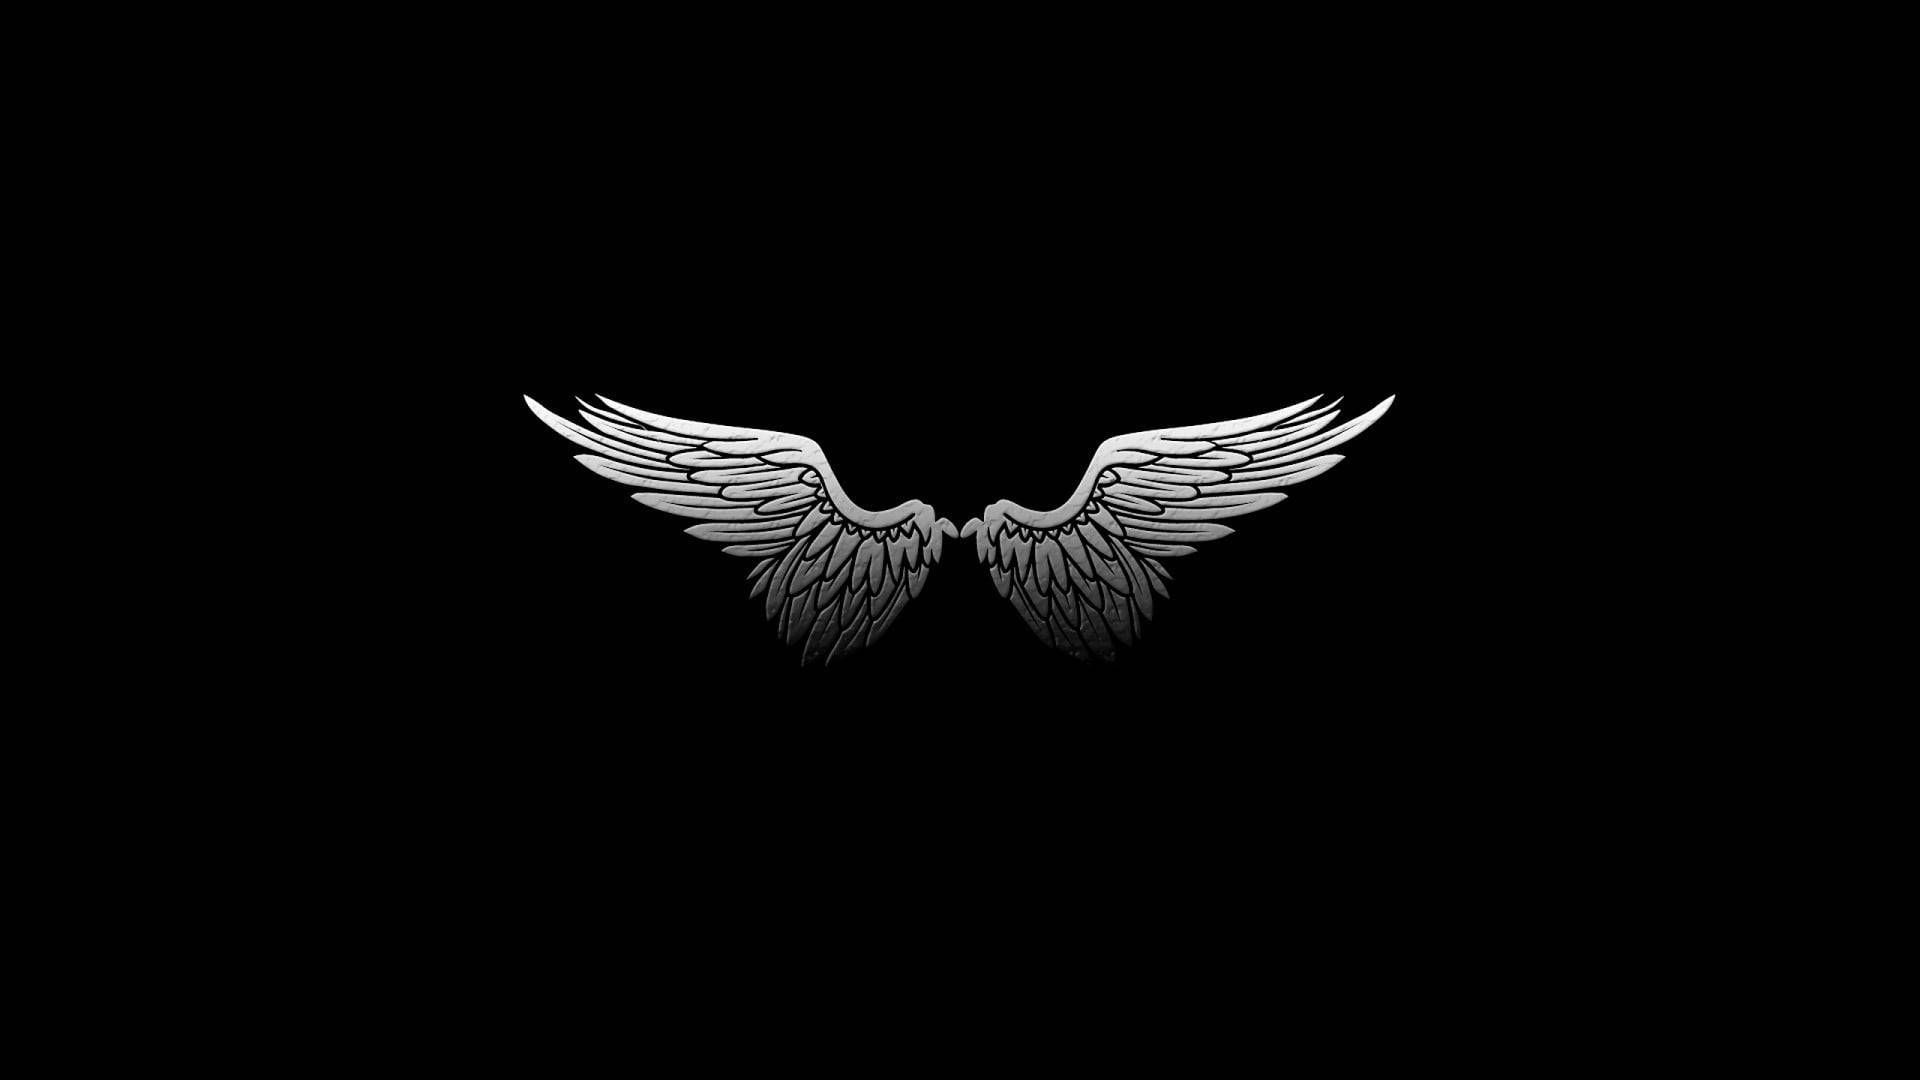 Two silver wings on a black background - Wings